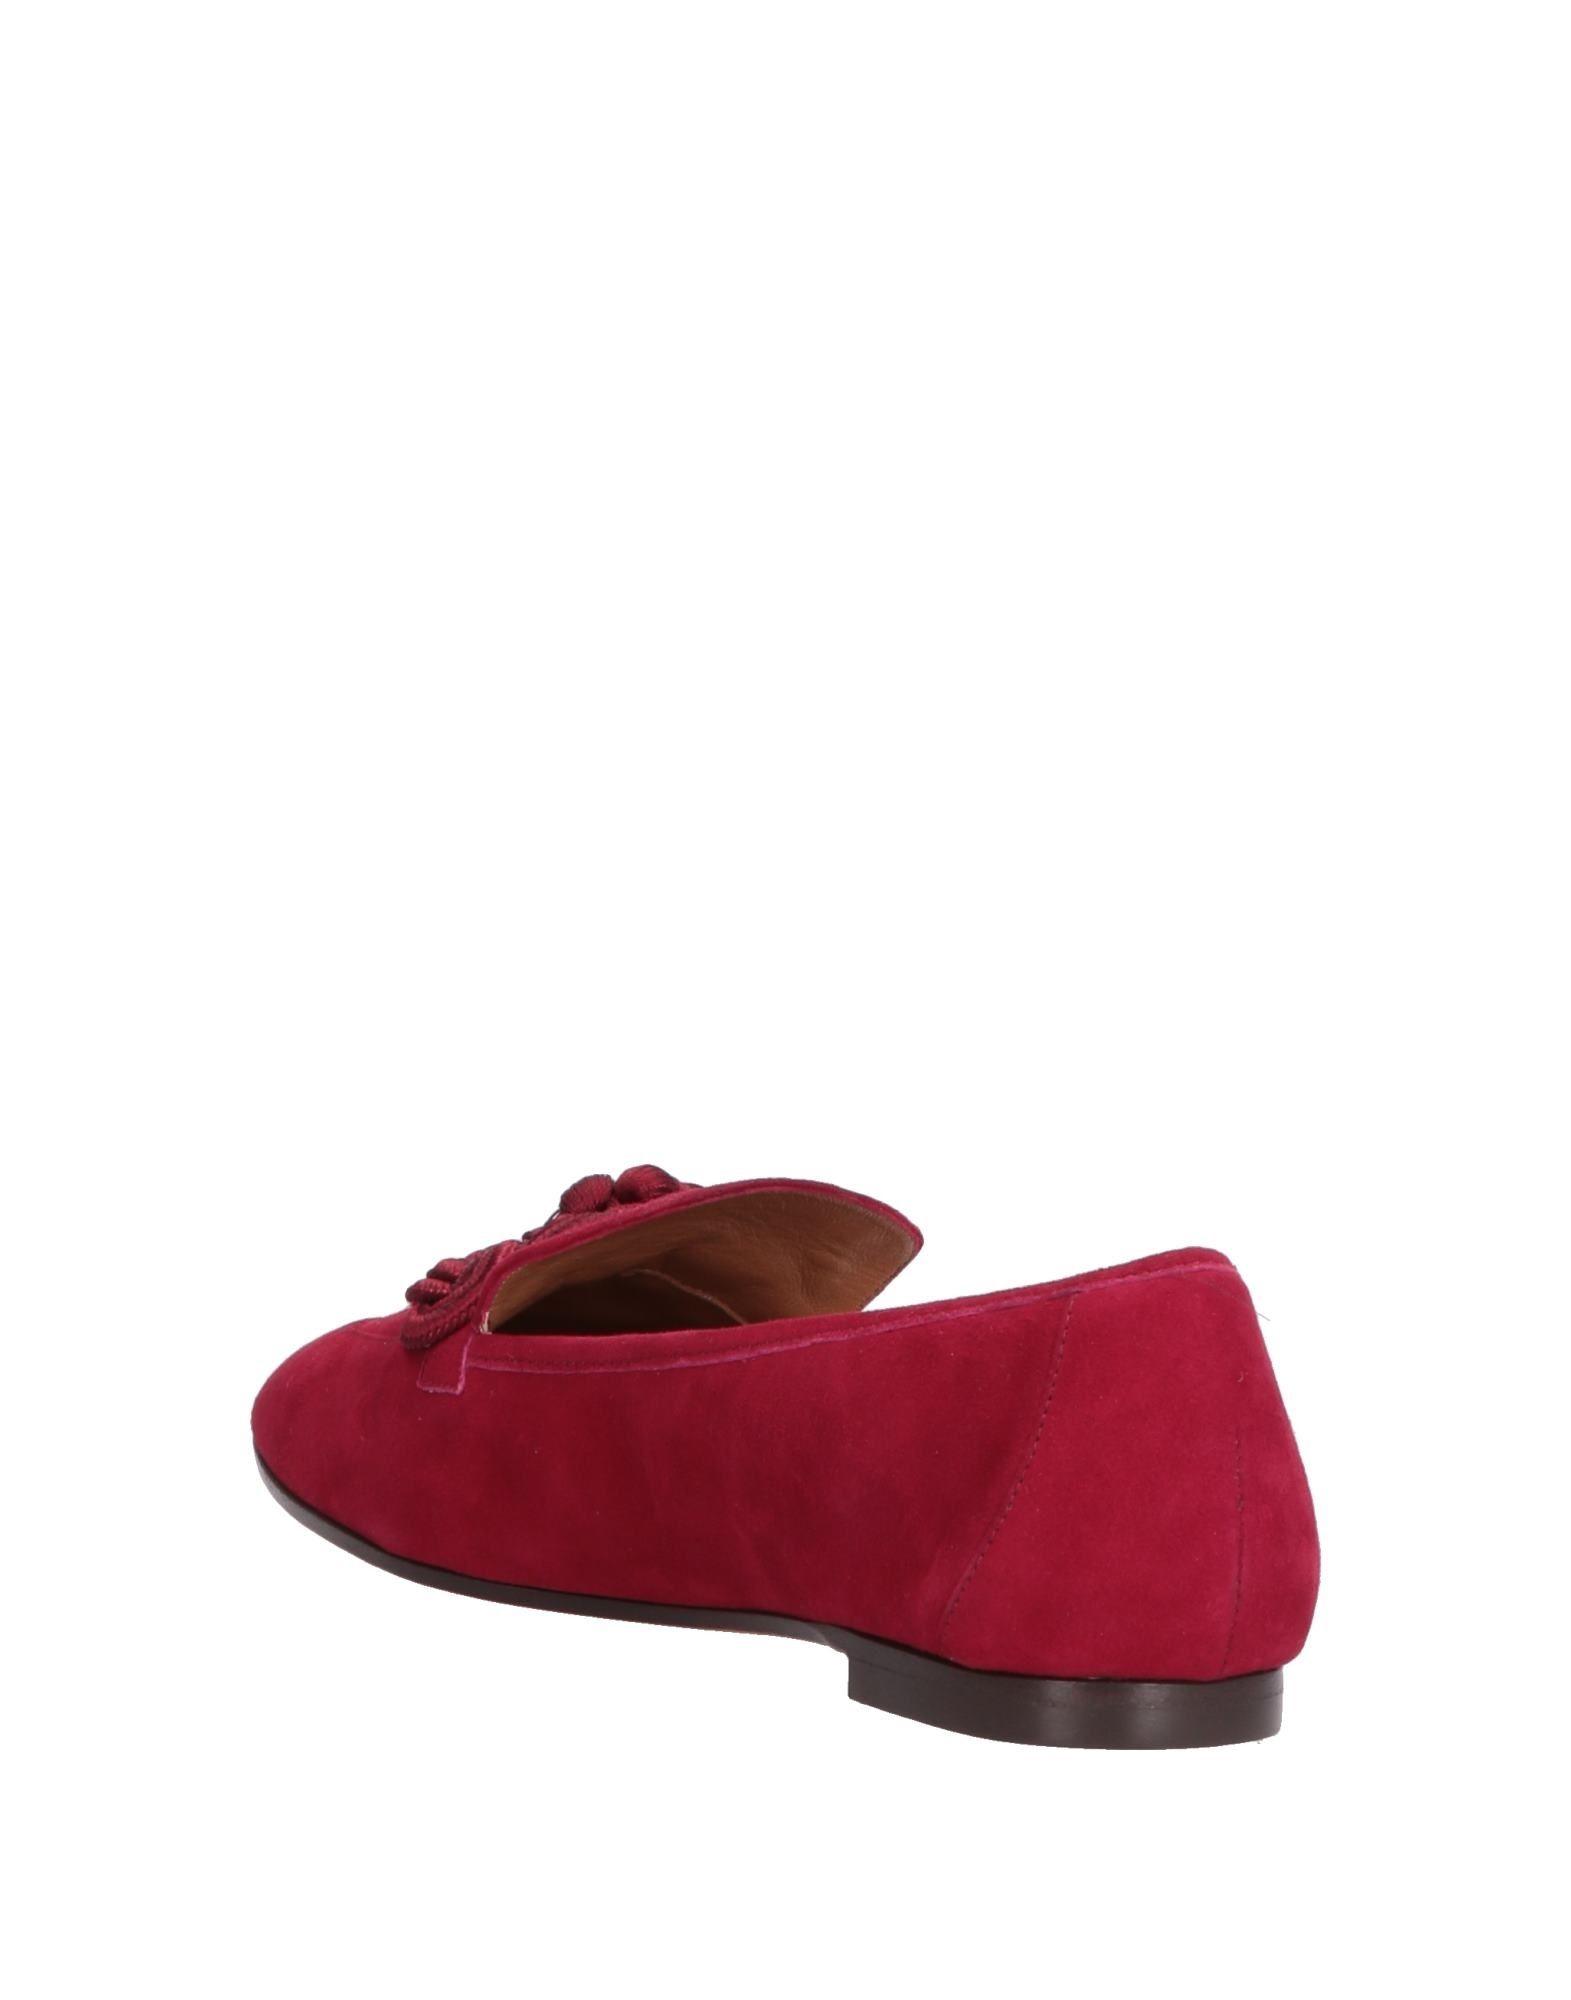 Aquazzura Suede Loafer in Maroon (Red) - Lyst